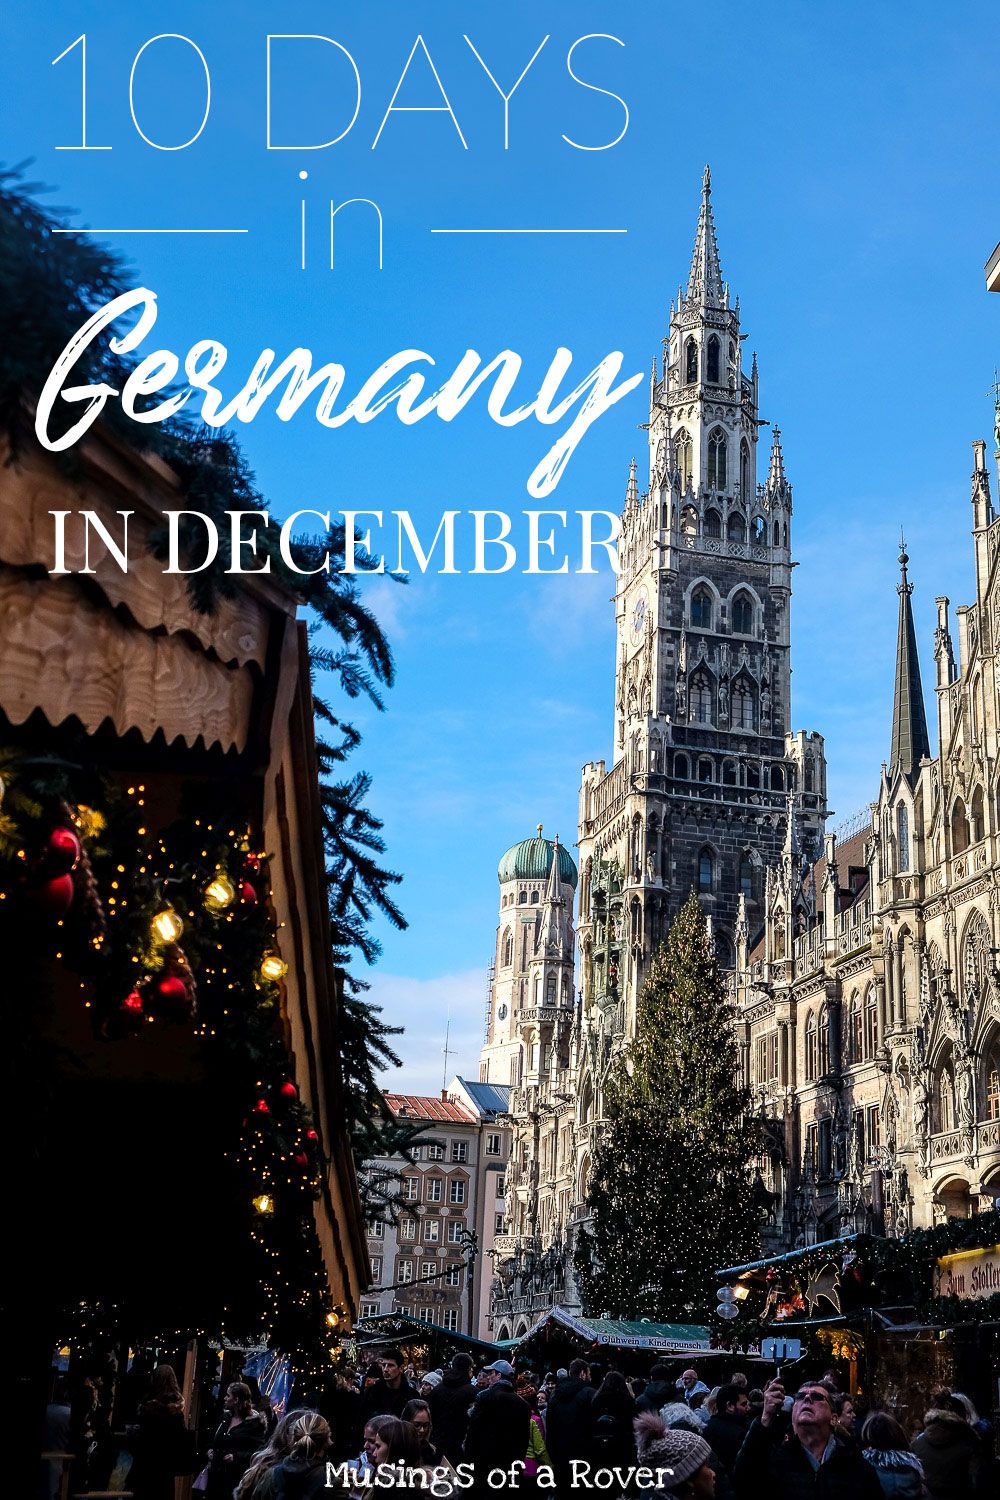 Heading to Germany in December? This 10 Day Itinerary is all about the Christmas Markets and what you can do in December. Loaded with the best things to do (including christmas markets, historical sites, viewpoints) which cities and towns to hit, where to eat, and where to stay, you’ll be able to plan your trip in no time. It also includes a packing list so you can know how much you need to bring. Get ready to experience Christmas in Germany!